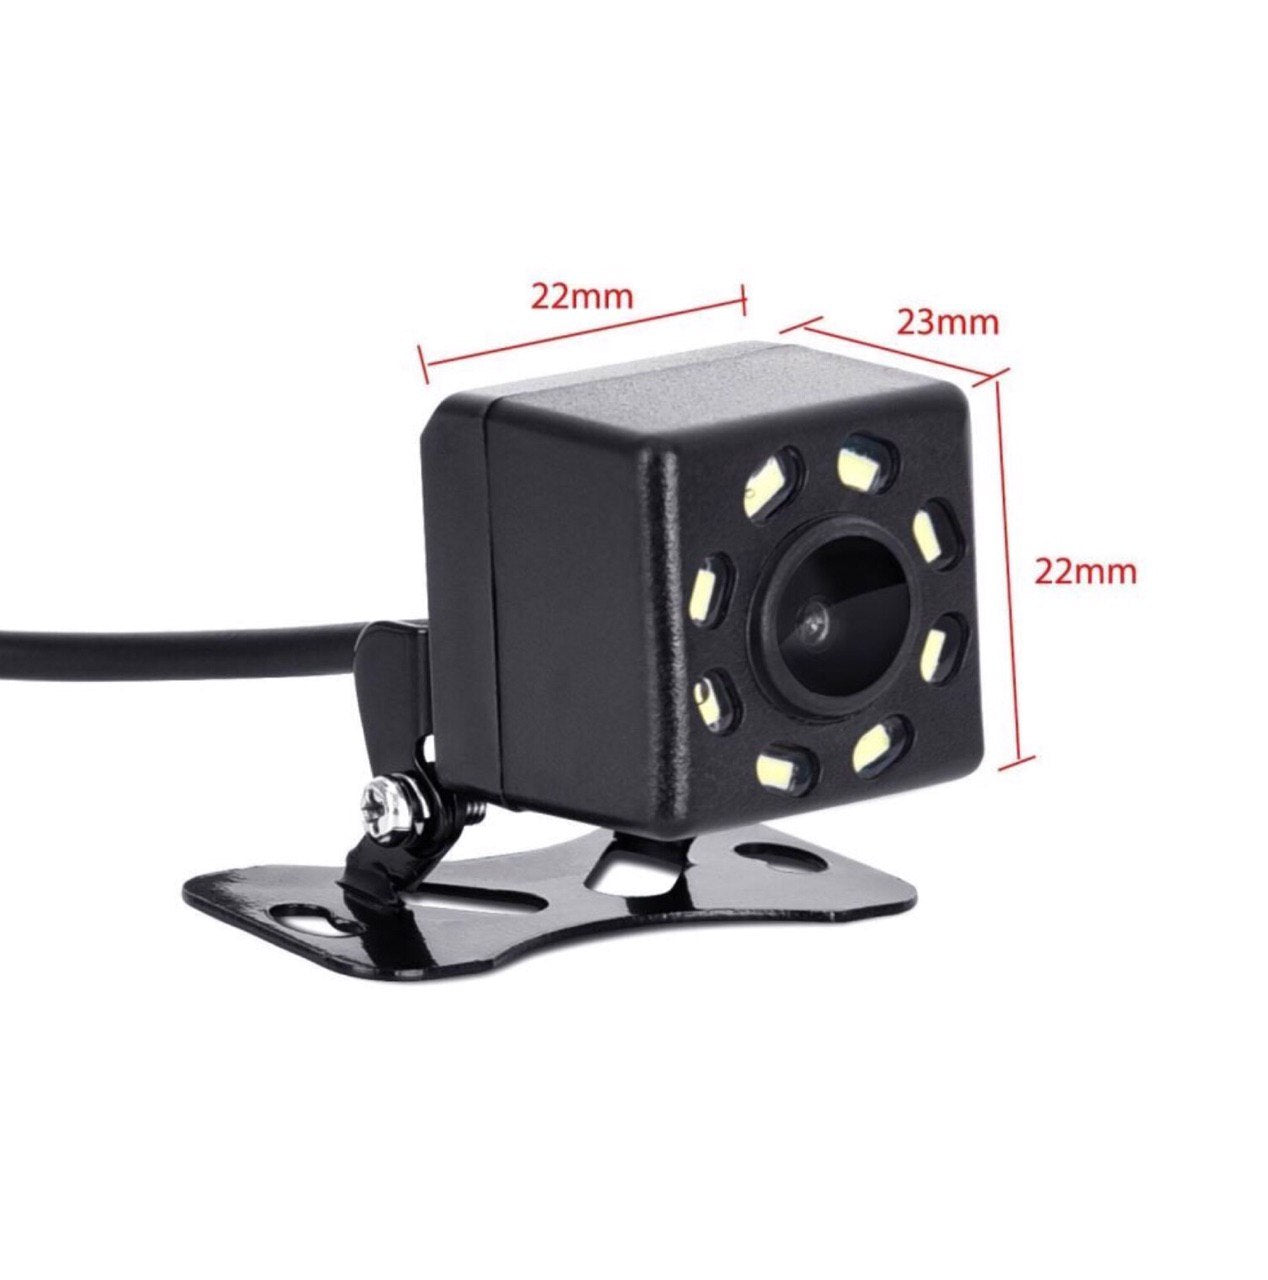 Car Rear View Camera 8 LED Night Vision Reversing Auto Parking for Car Stereo Monitor CCD HD Video